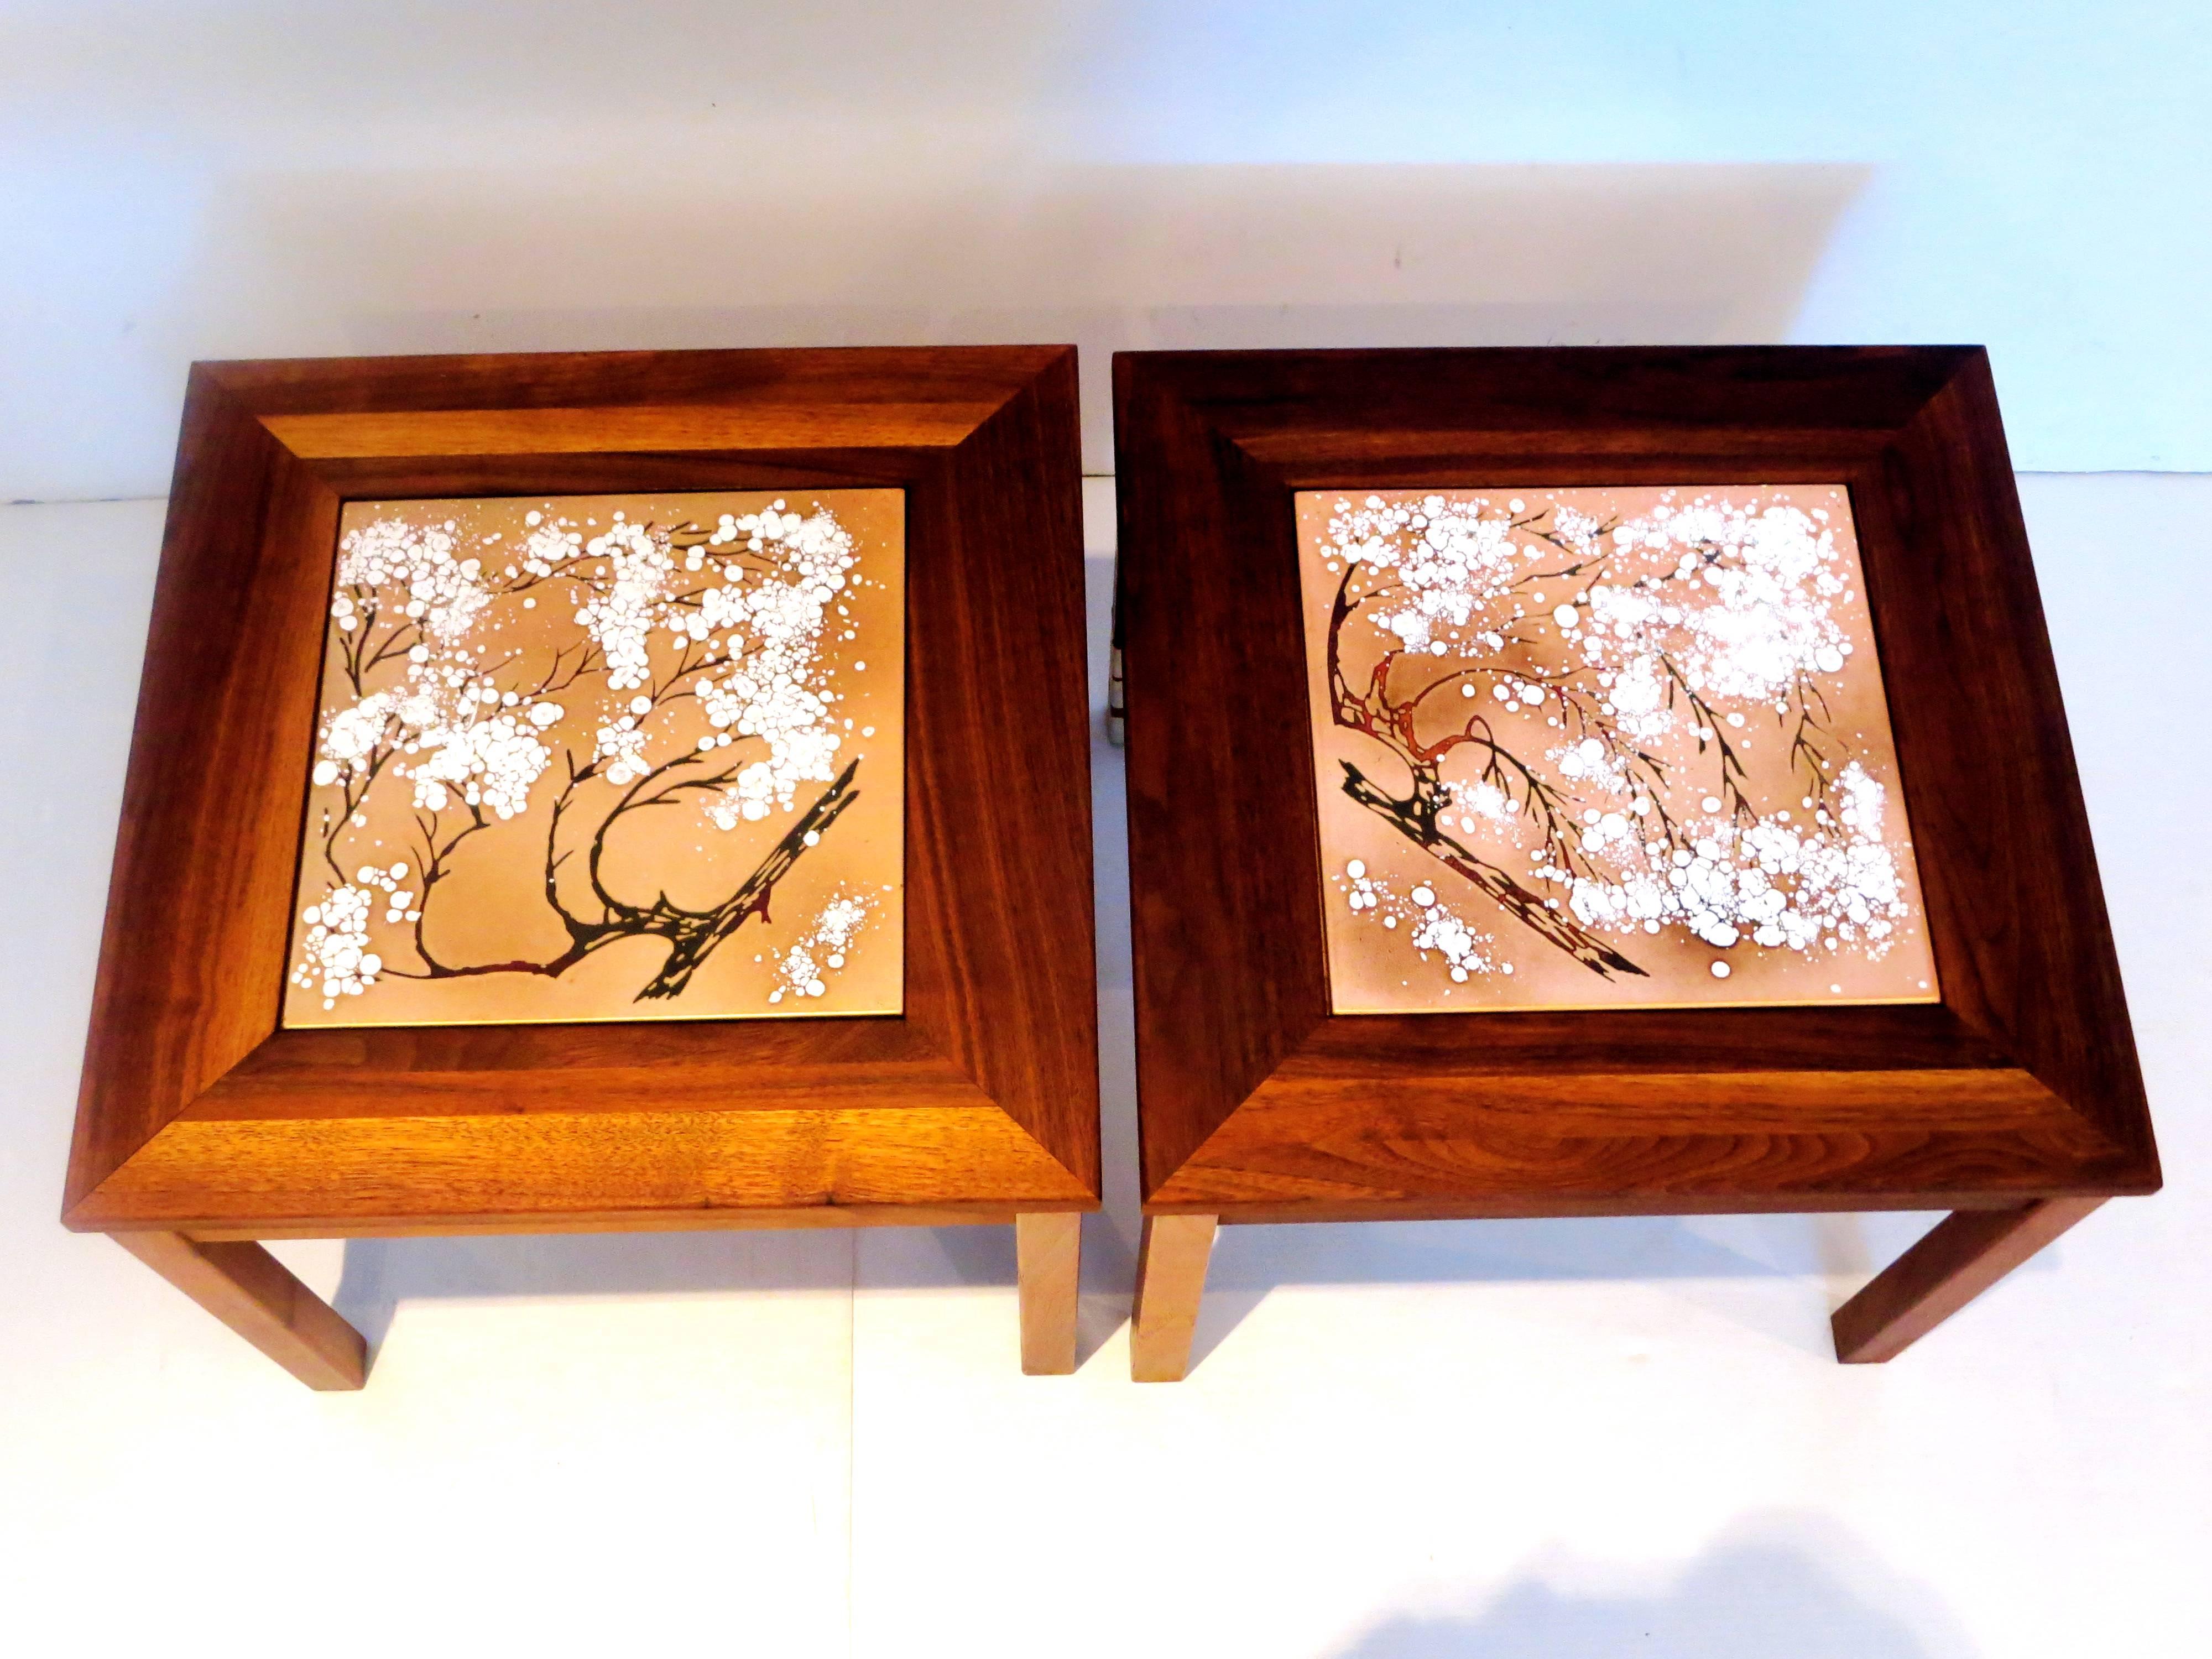 Hollywood Regency Pair of Solid Walnut Enameled End Tables Designed by Jhon Keal for Brown Saltman